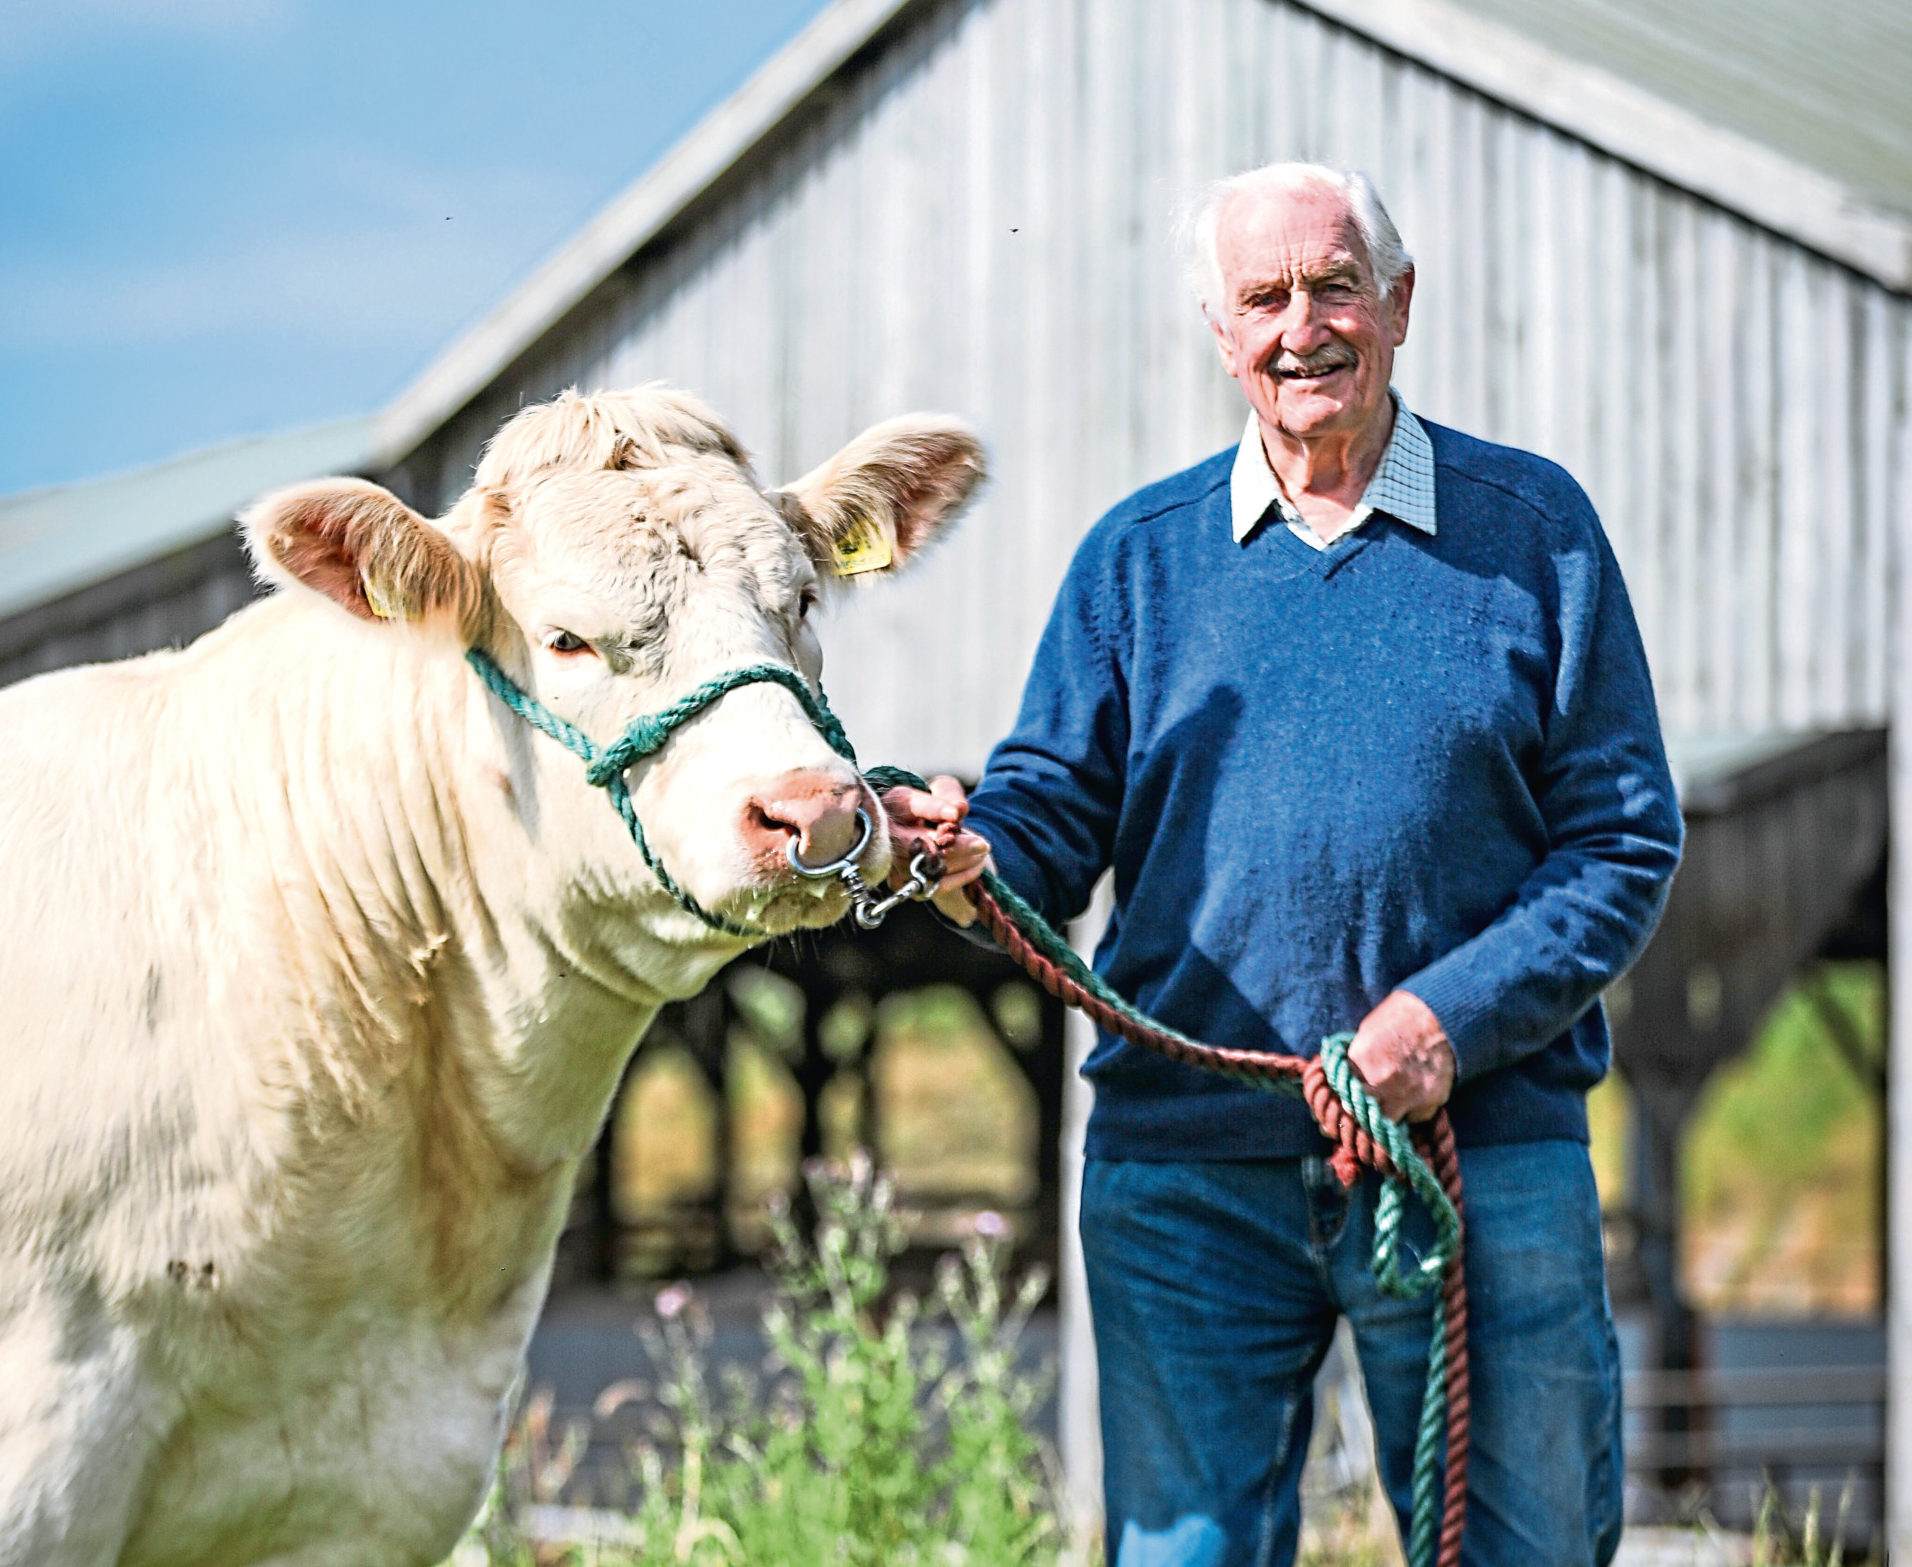 Major David Walter has been breeding Charolais cattle for 50 years.